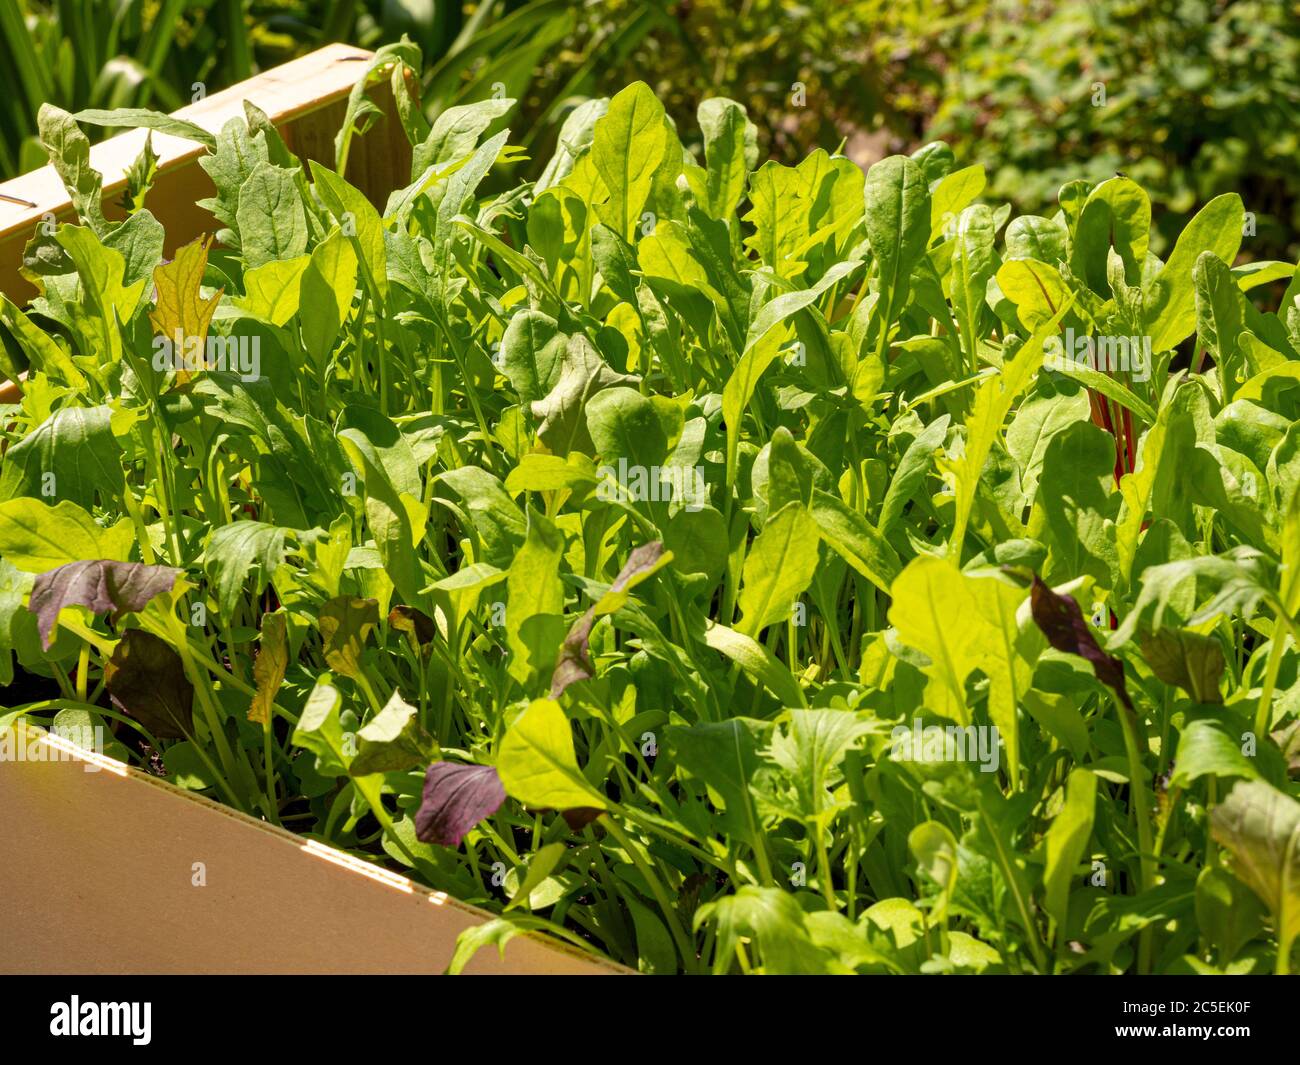 Mixed salad leaves growing in a recycled wooden vegetable box. Stock Photo